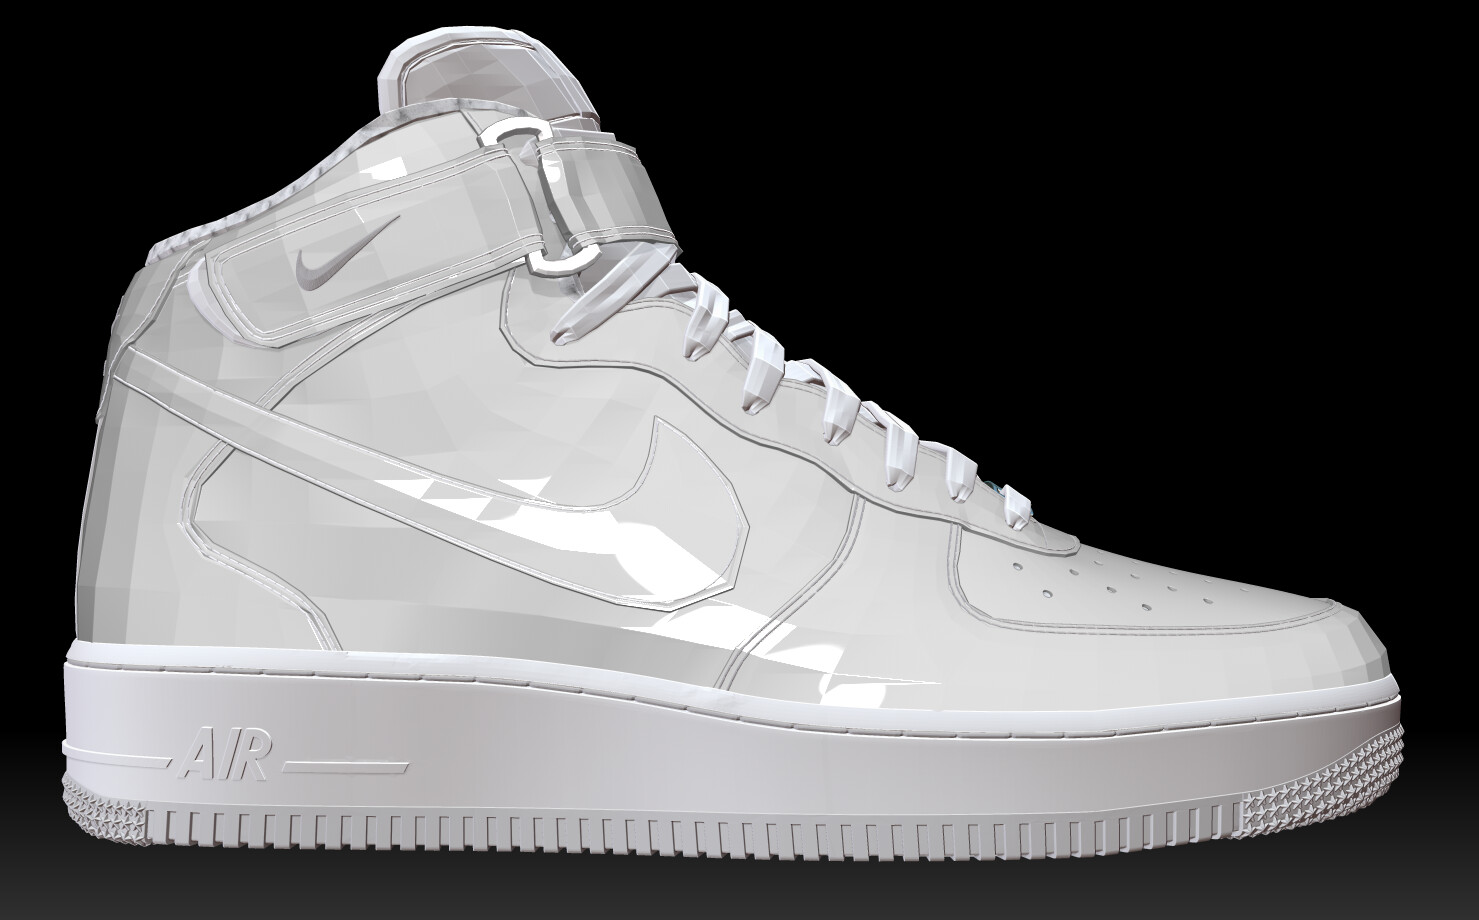 ArtStation NIKE AIR FORCE 1 HIGH low-poly Game Assets